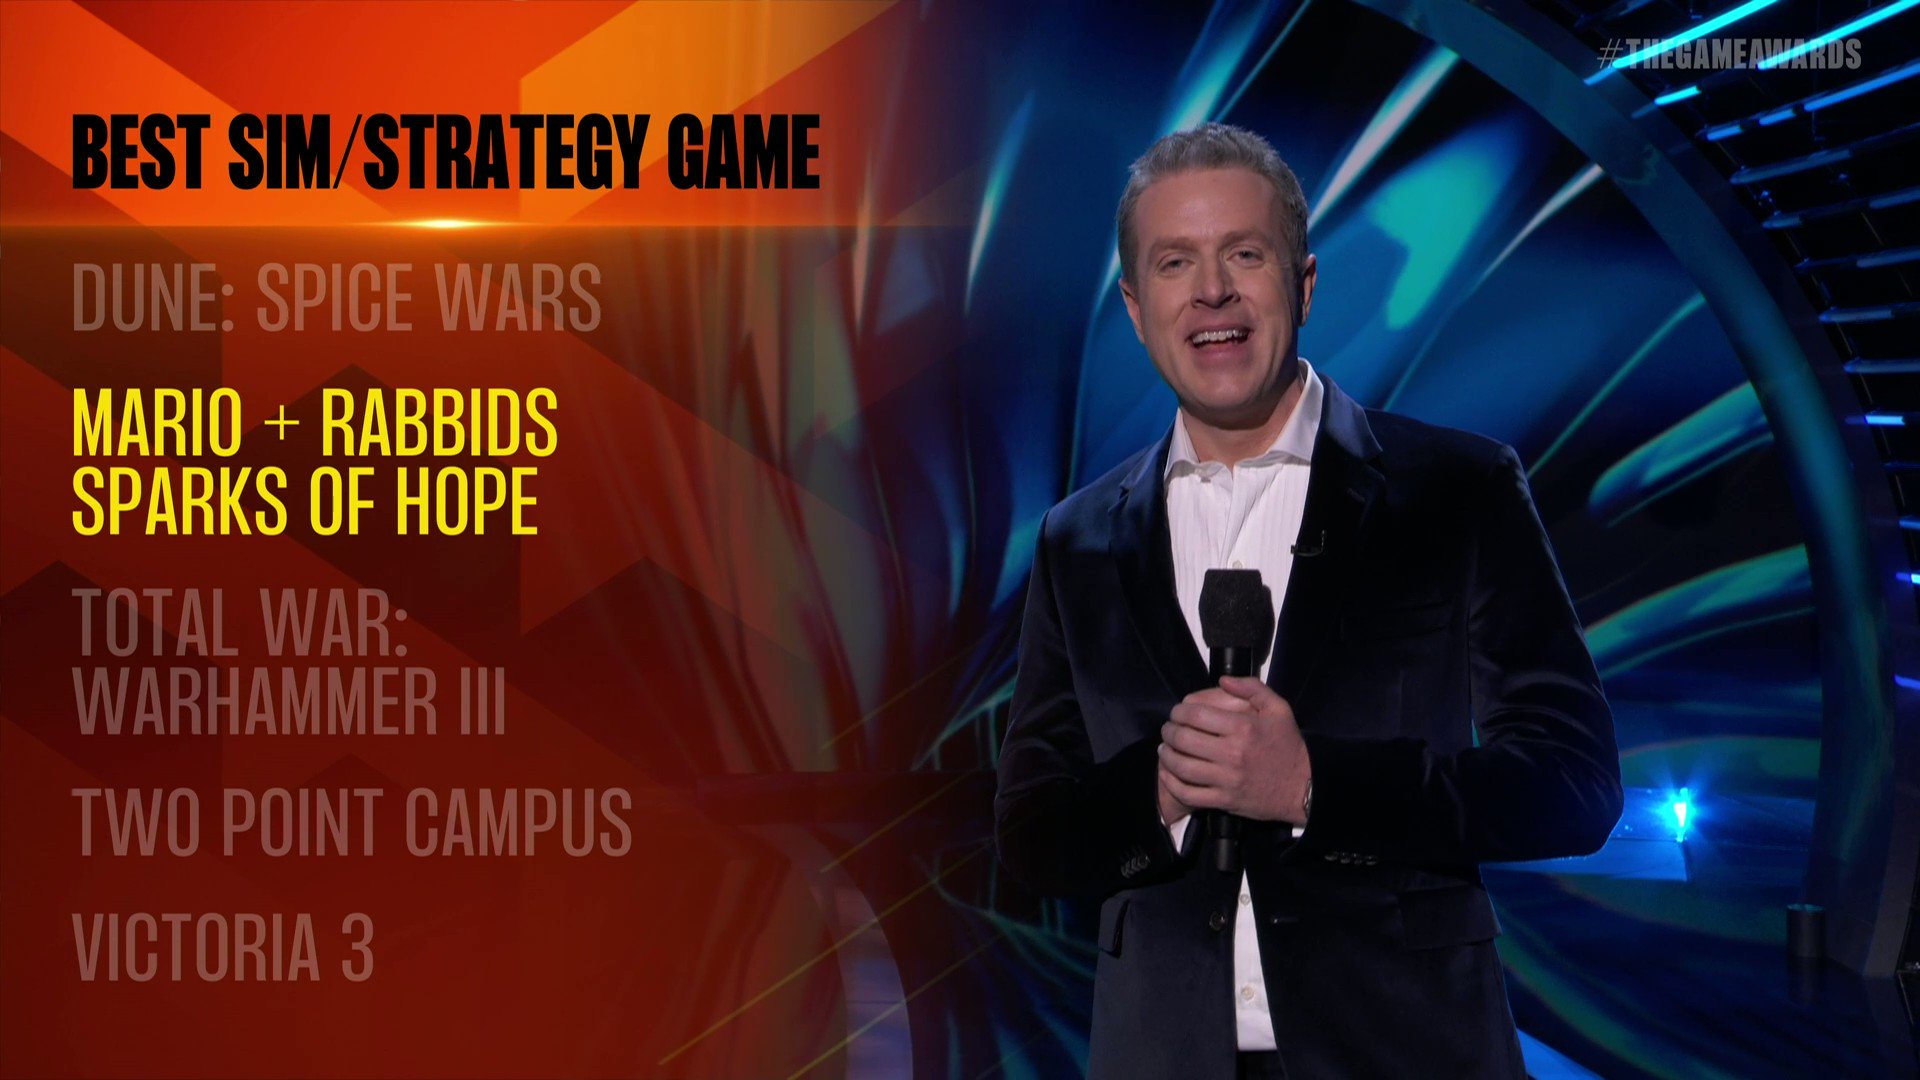 The Game Awards 2019 Adds Digital Event The Game Festival with Free Demos -  Fextralife